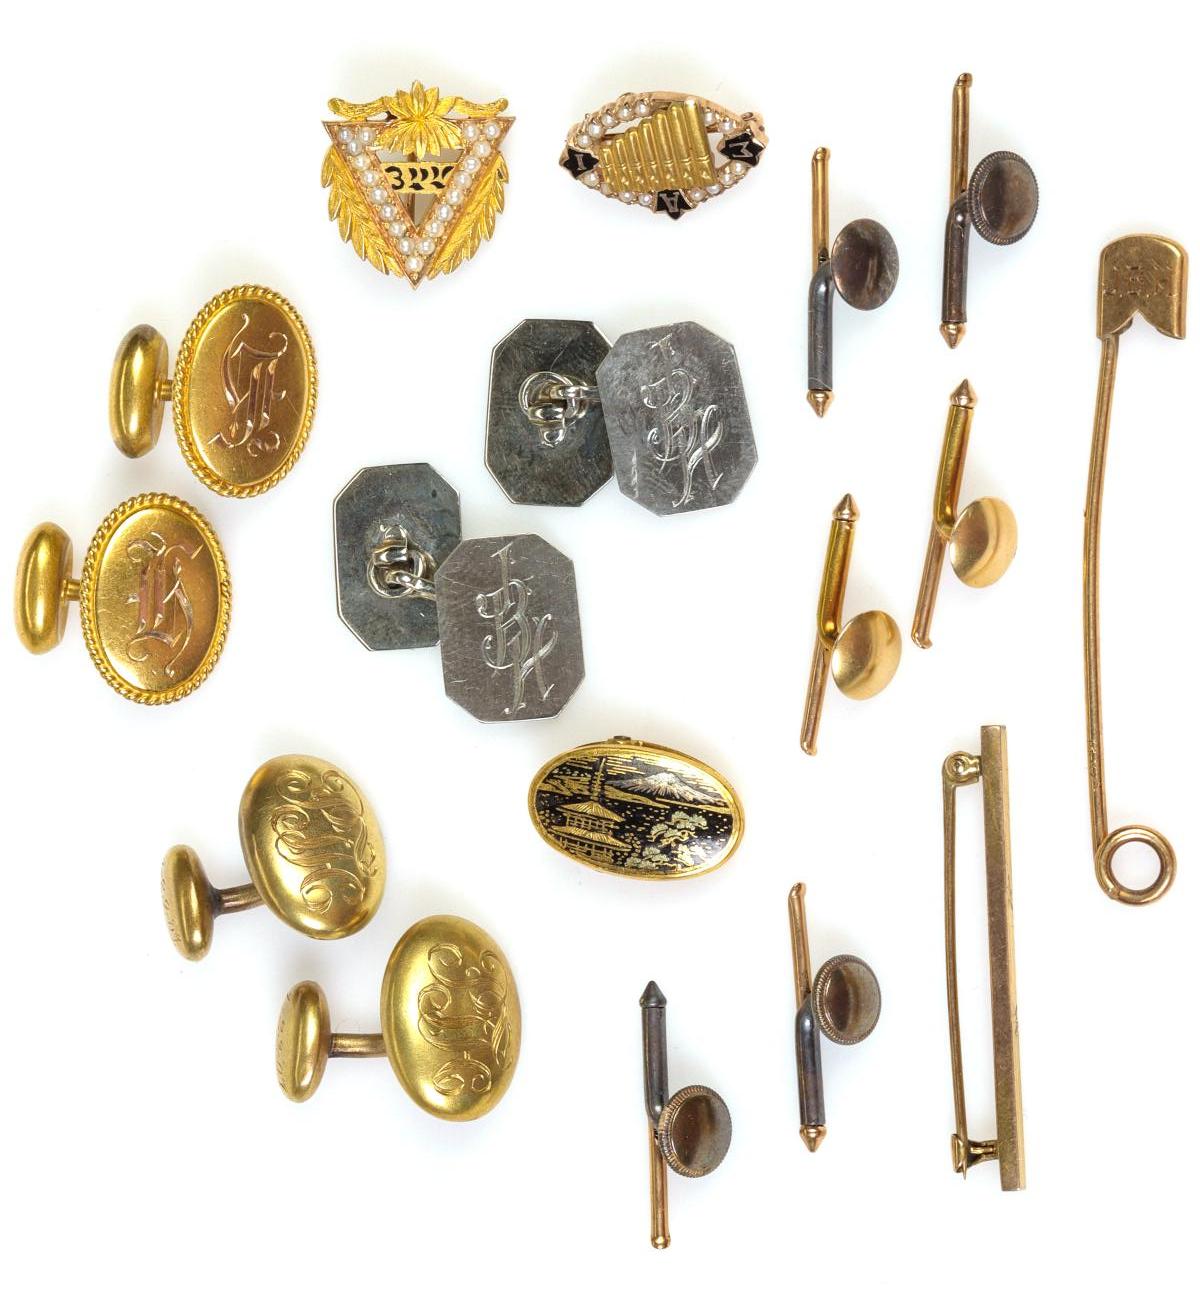 GOLD AND OTHER CUFFLINKS AND RELATED ARTICLES